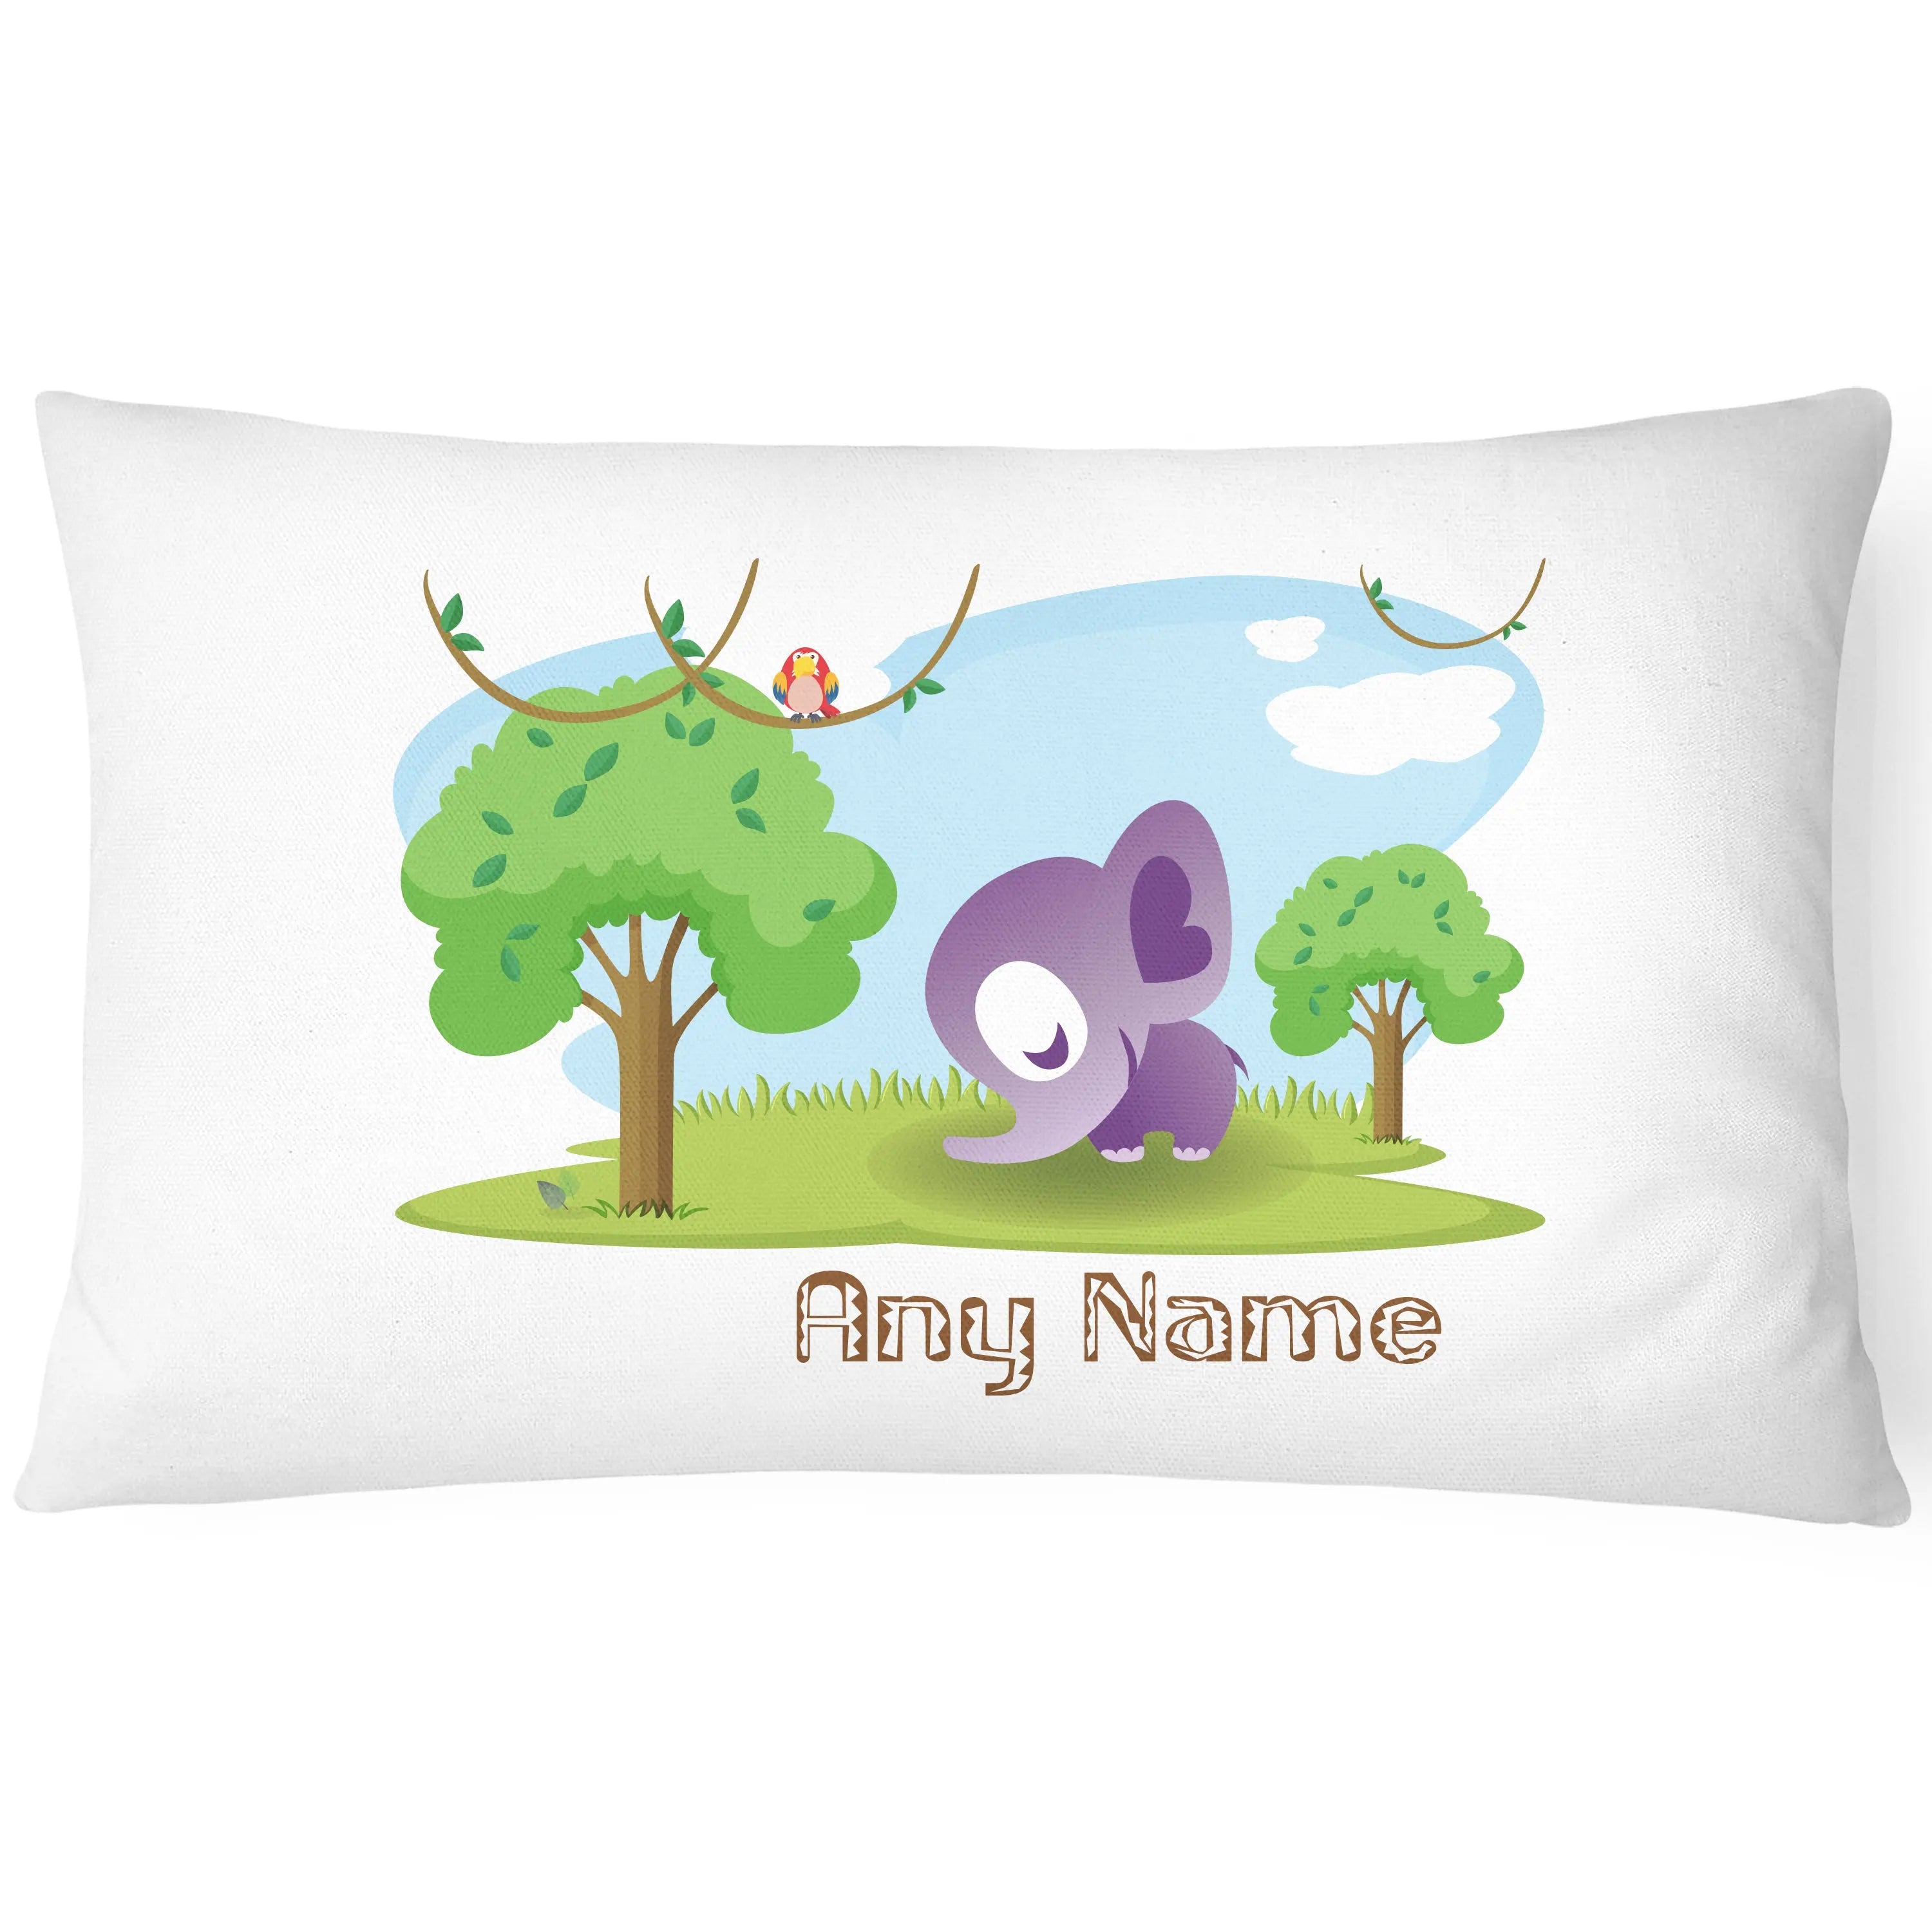 Cute Animal Zoo - Children's Pillowcase - Personalise with Any Name - Elephant